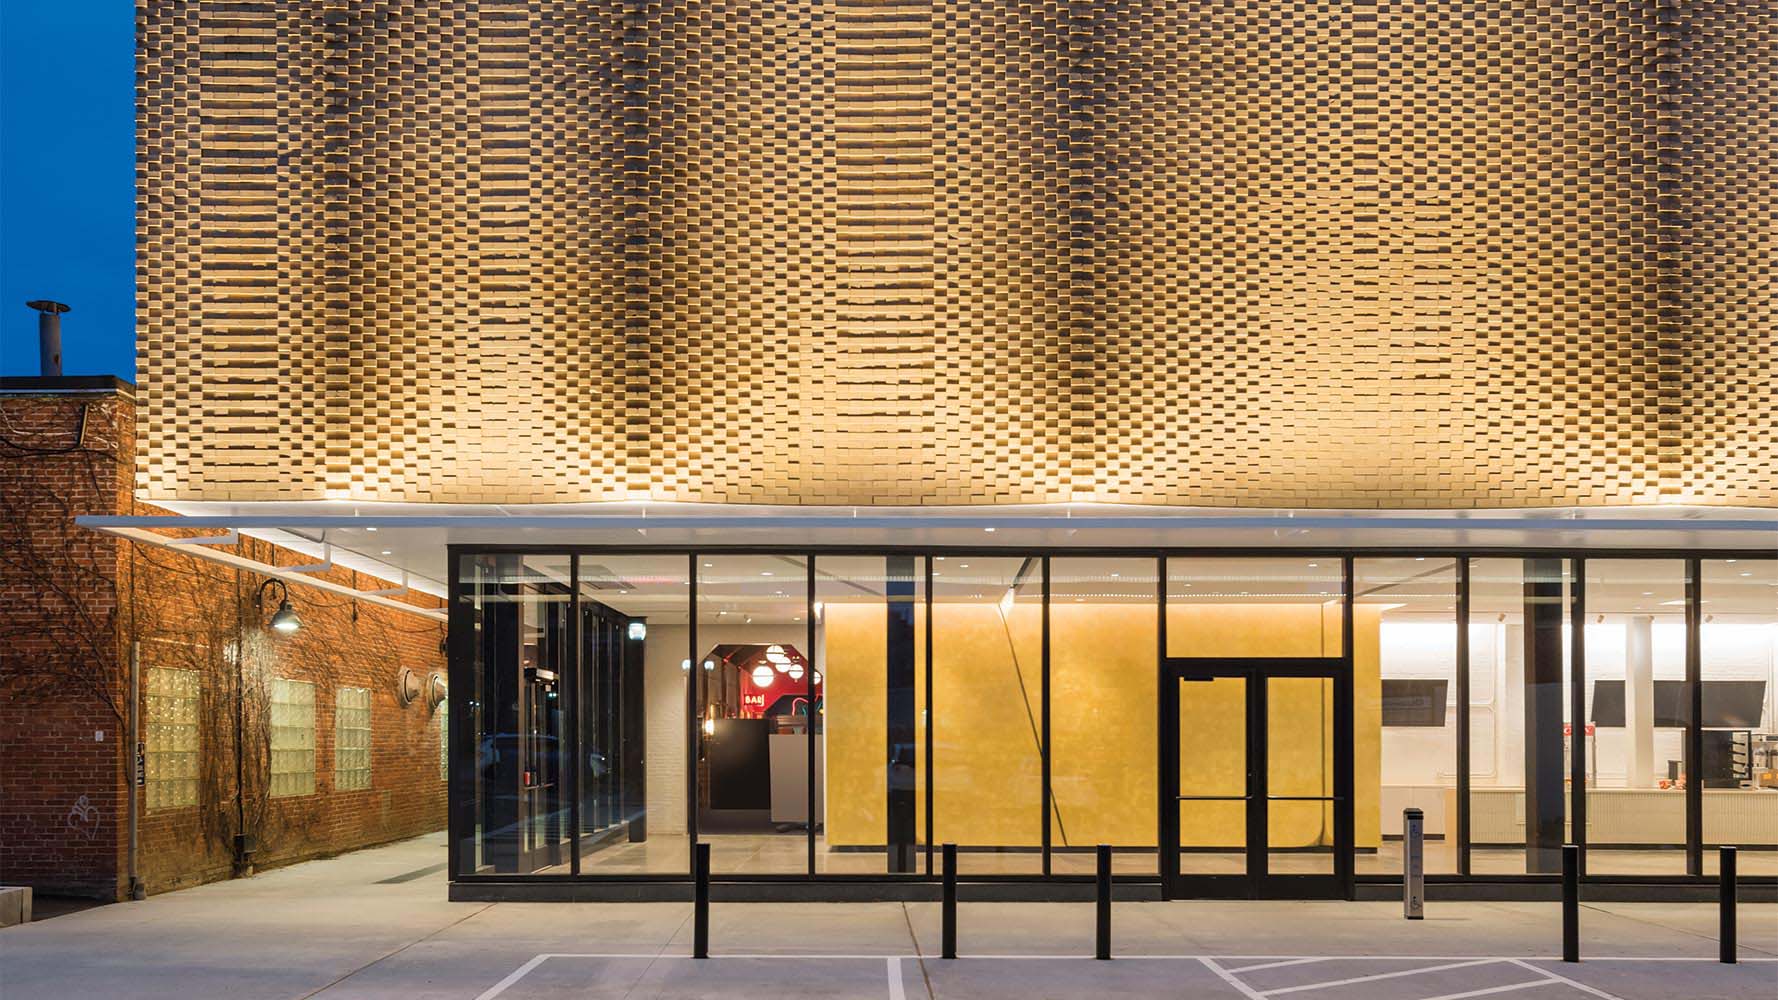 Höweler + Yoon Aims for Box Office Gold with an Ambitious Expansion to a Boston-area Landmark